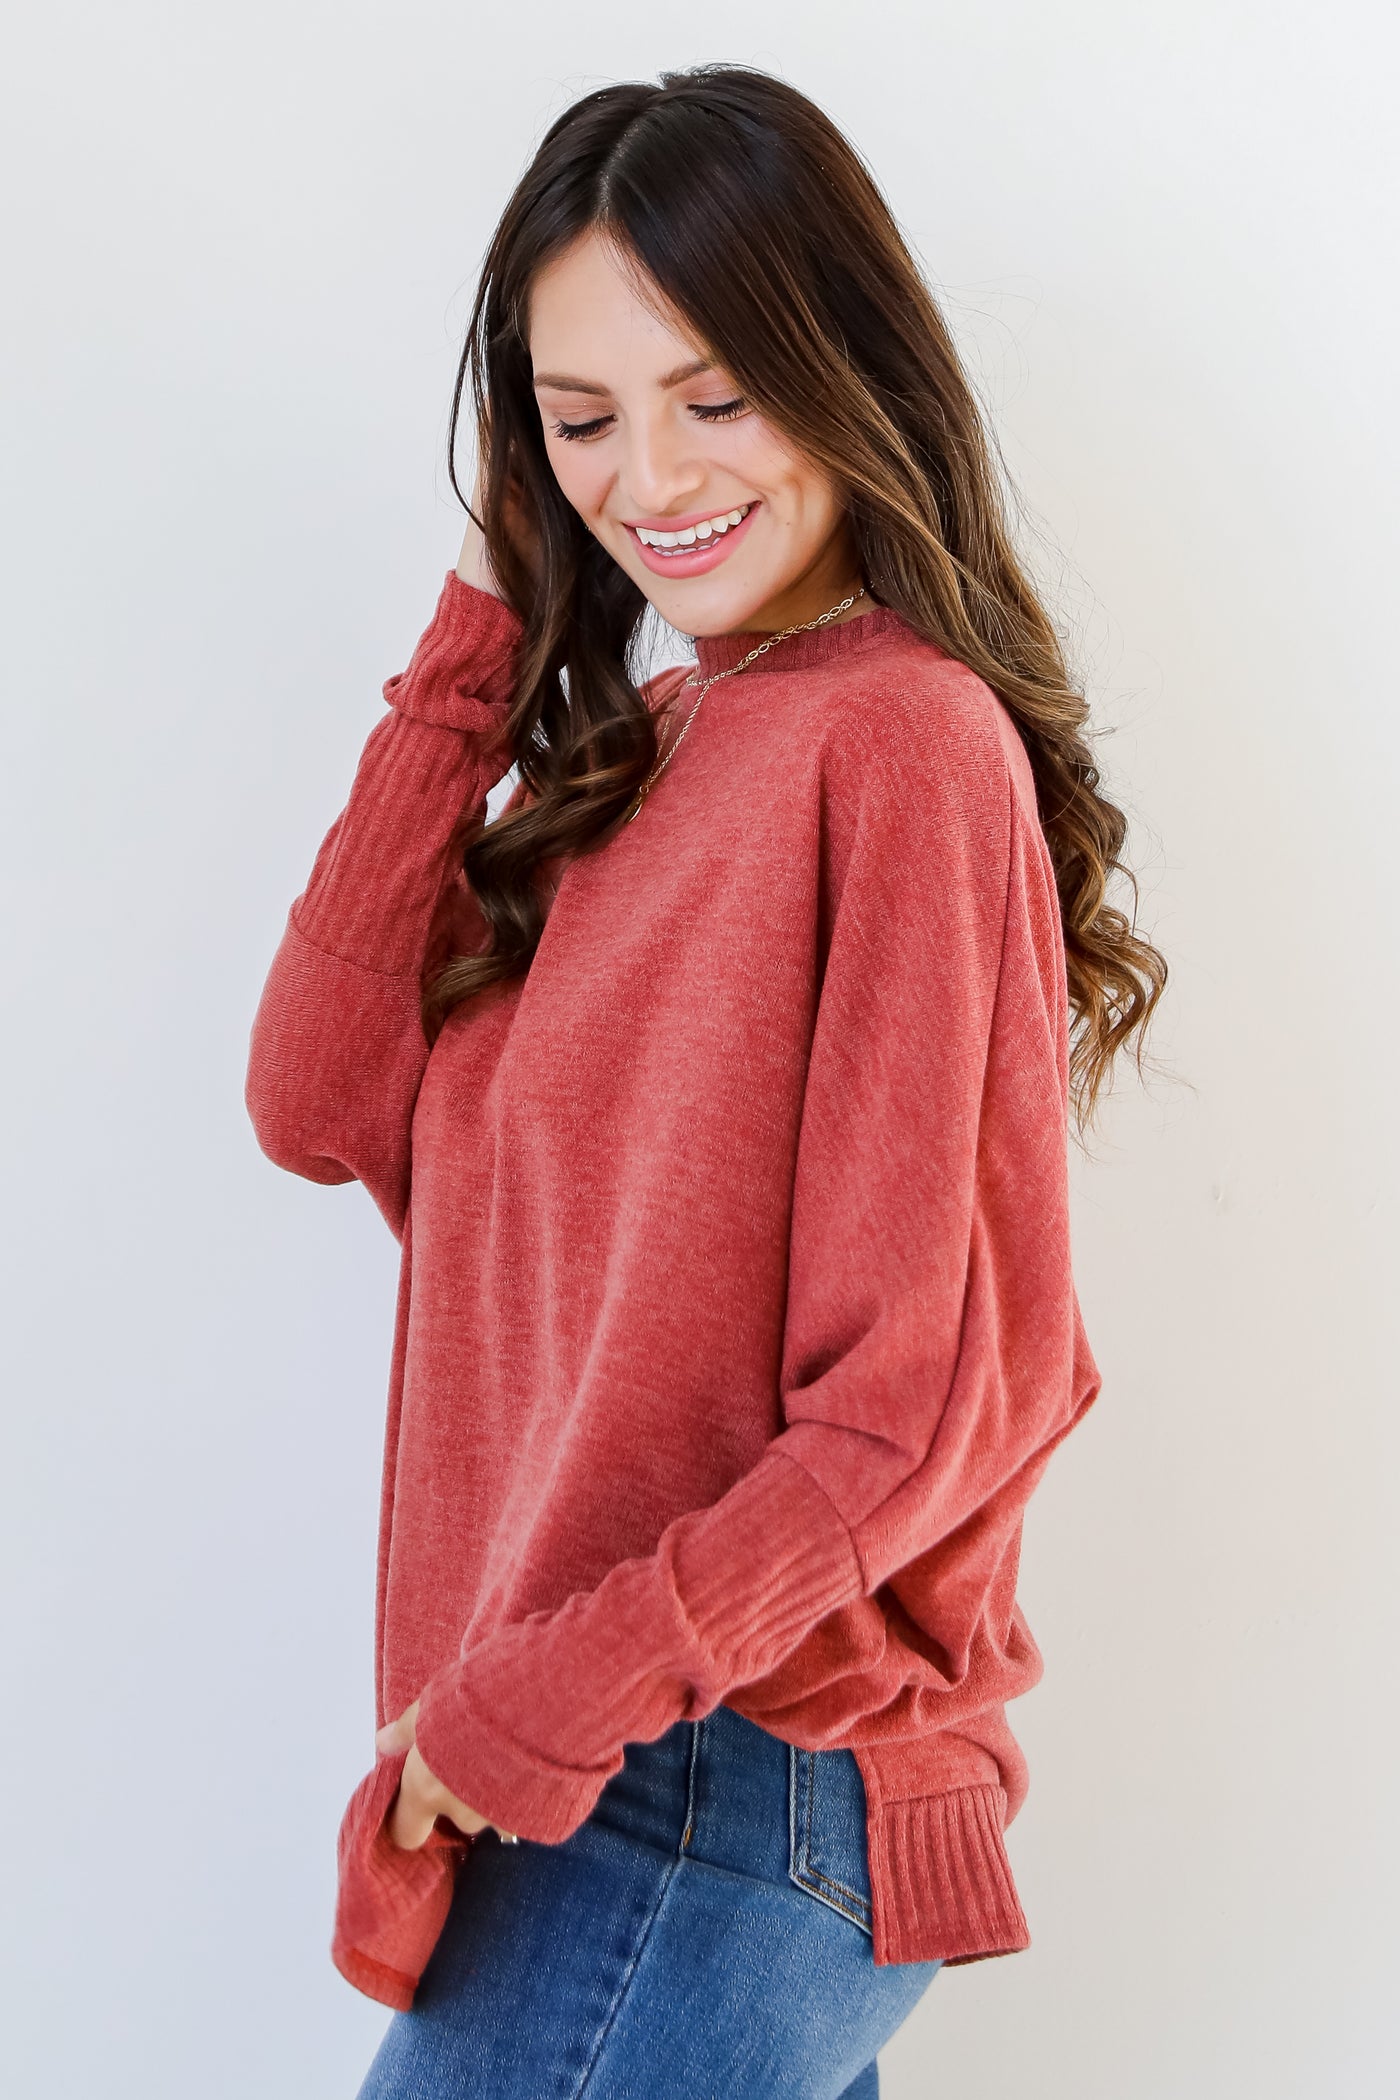 red Knit Top side view